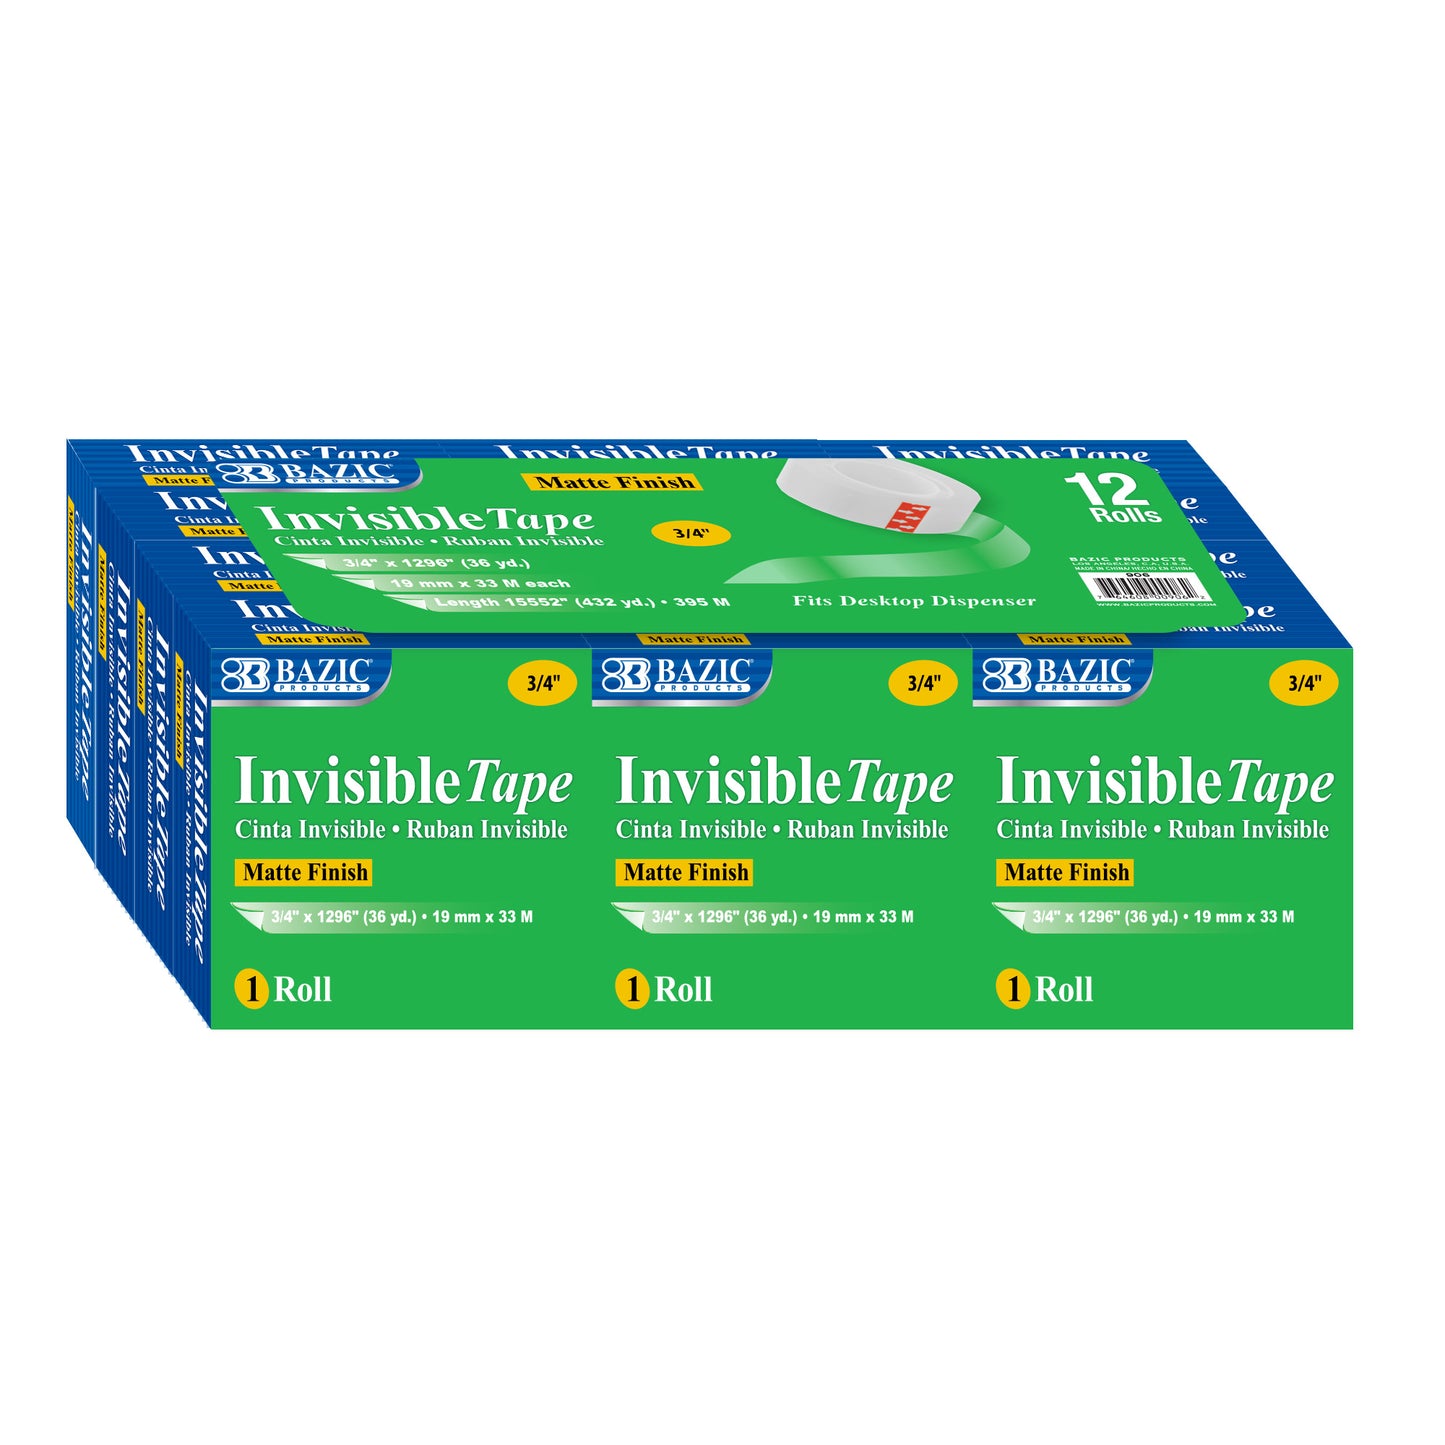 Tape Refill, Invisible Tape, 3/4" x 1000", 12 Rolls Per Pack, 2 Packs